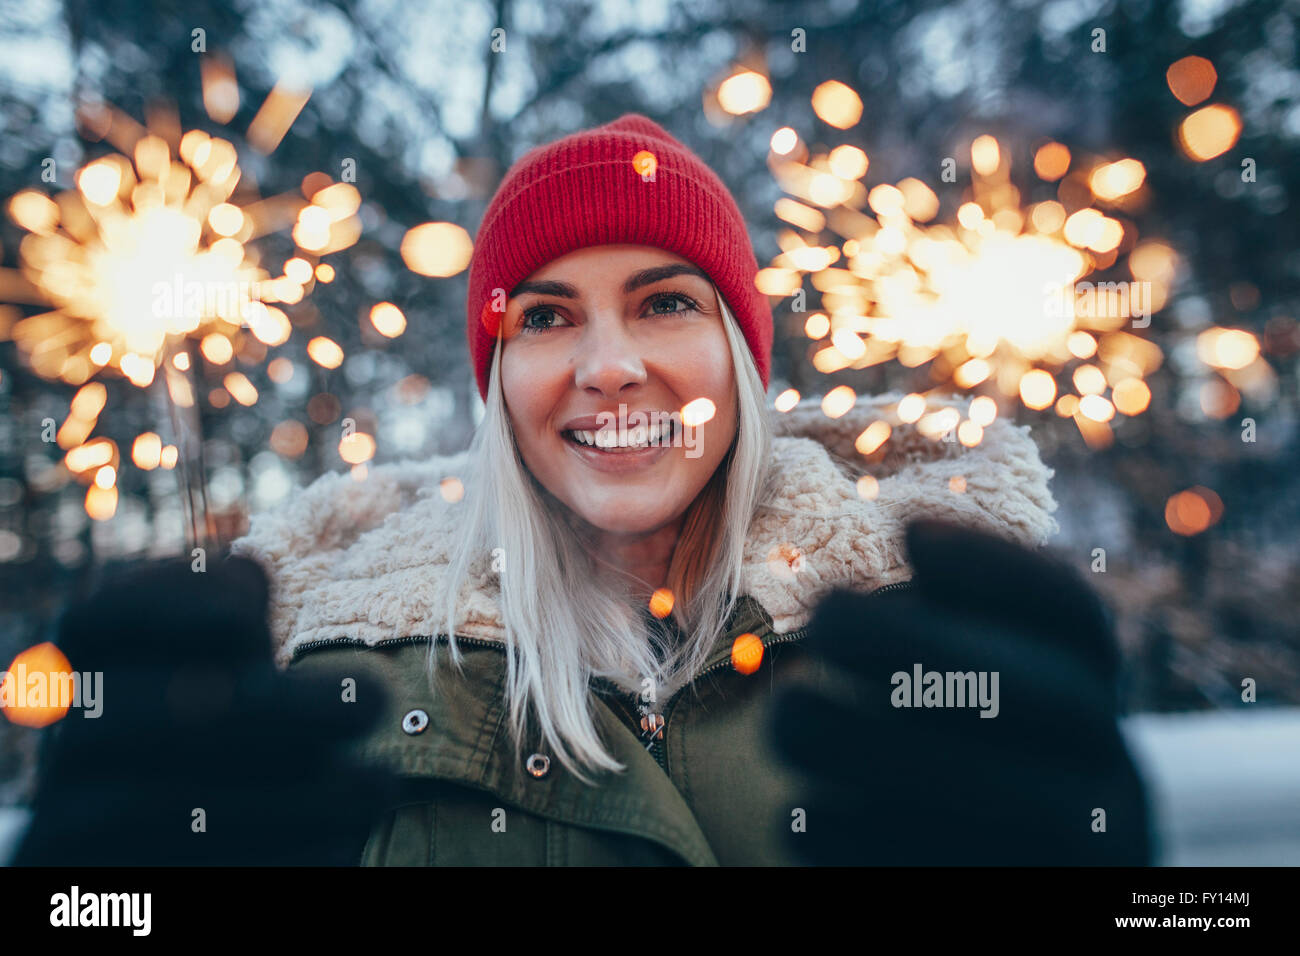 Happy woman holding sparklers during winter Stock Photo